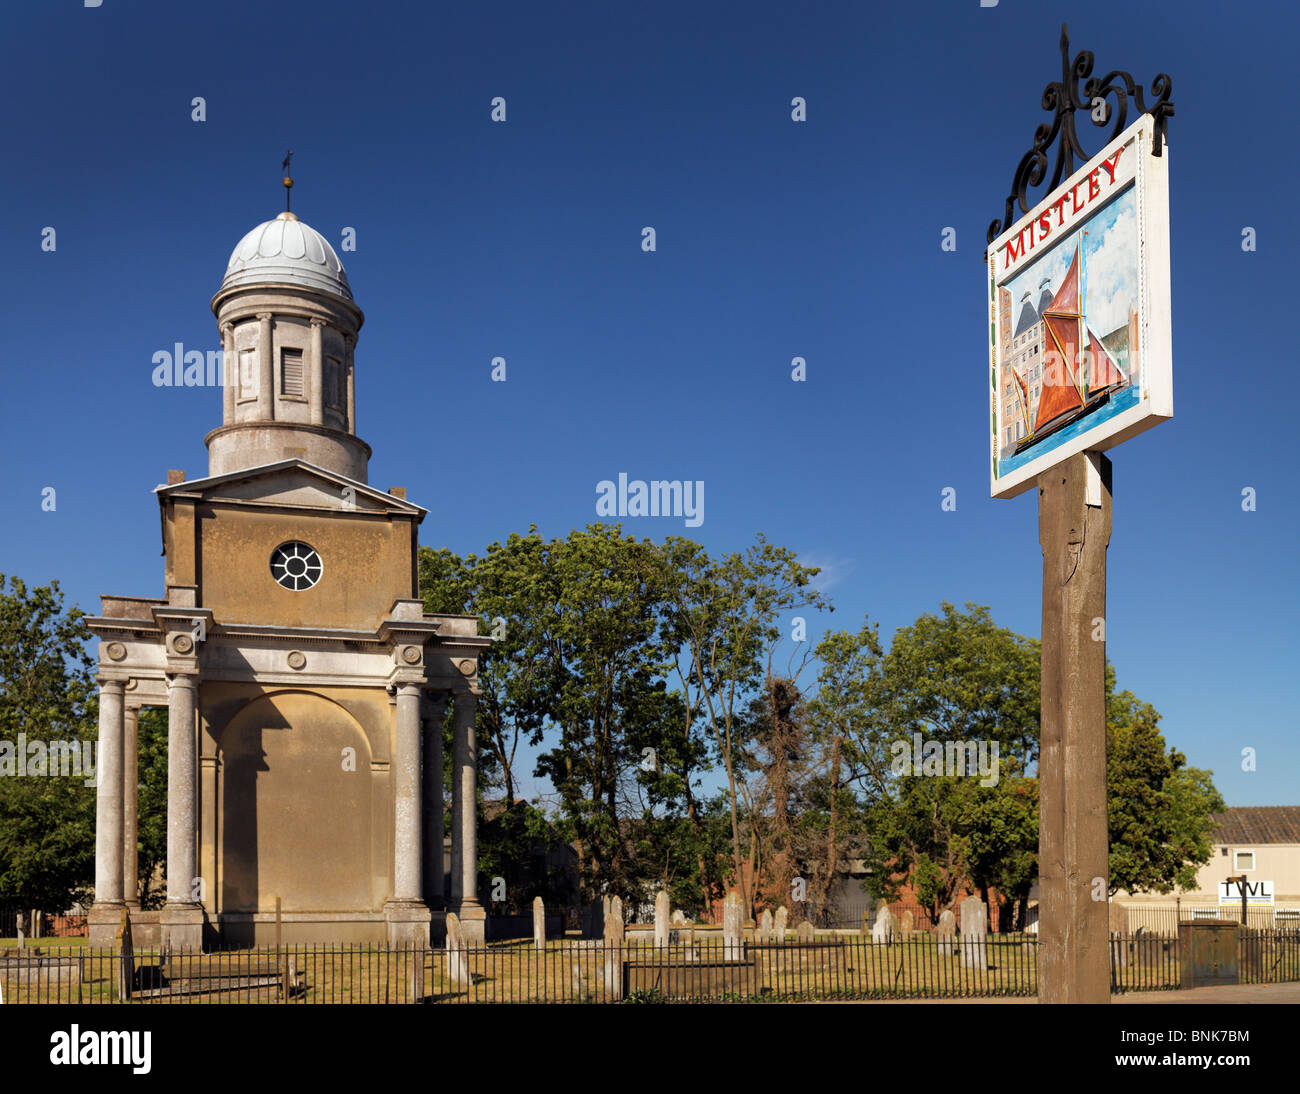 Mstley village sign with one of the twin towers that once formed part of the old neo classical church visible Stock Photo